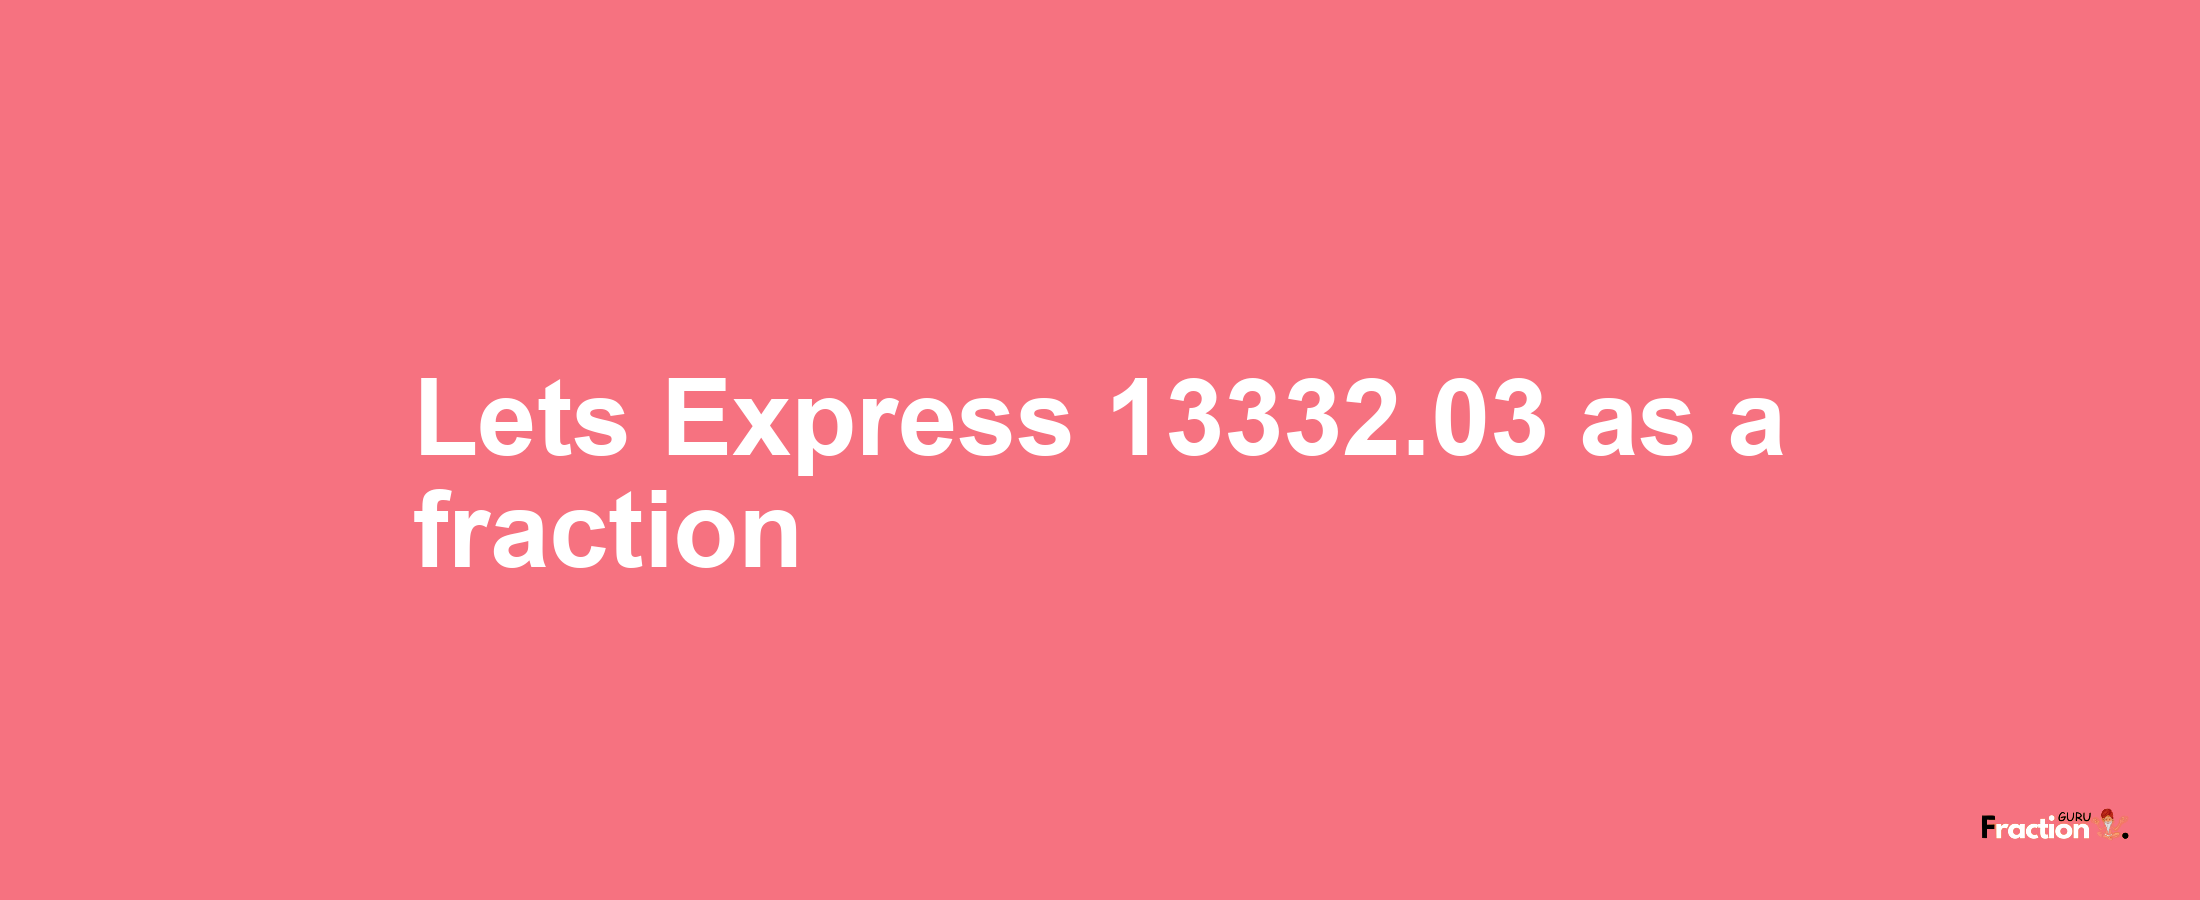 Lets Express 13332.03 as afraction